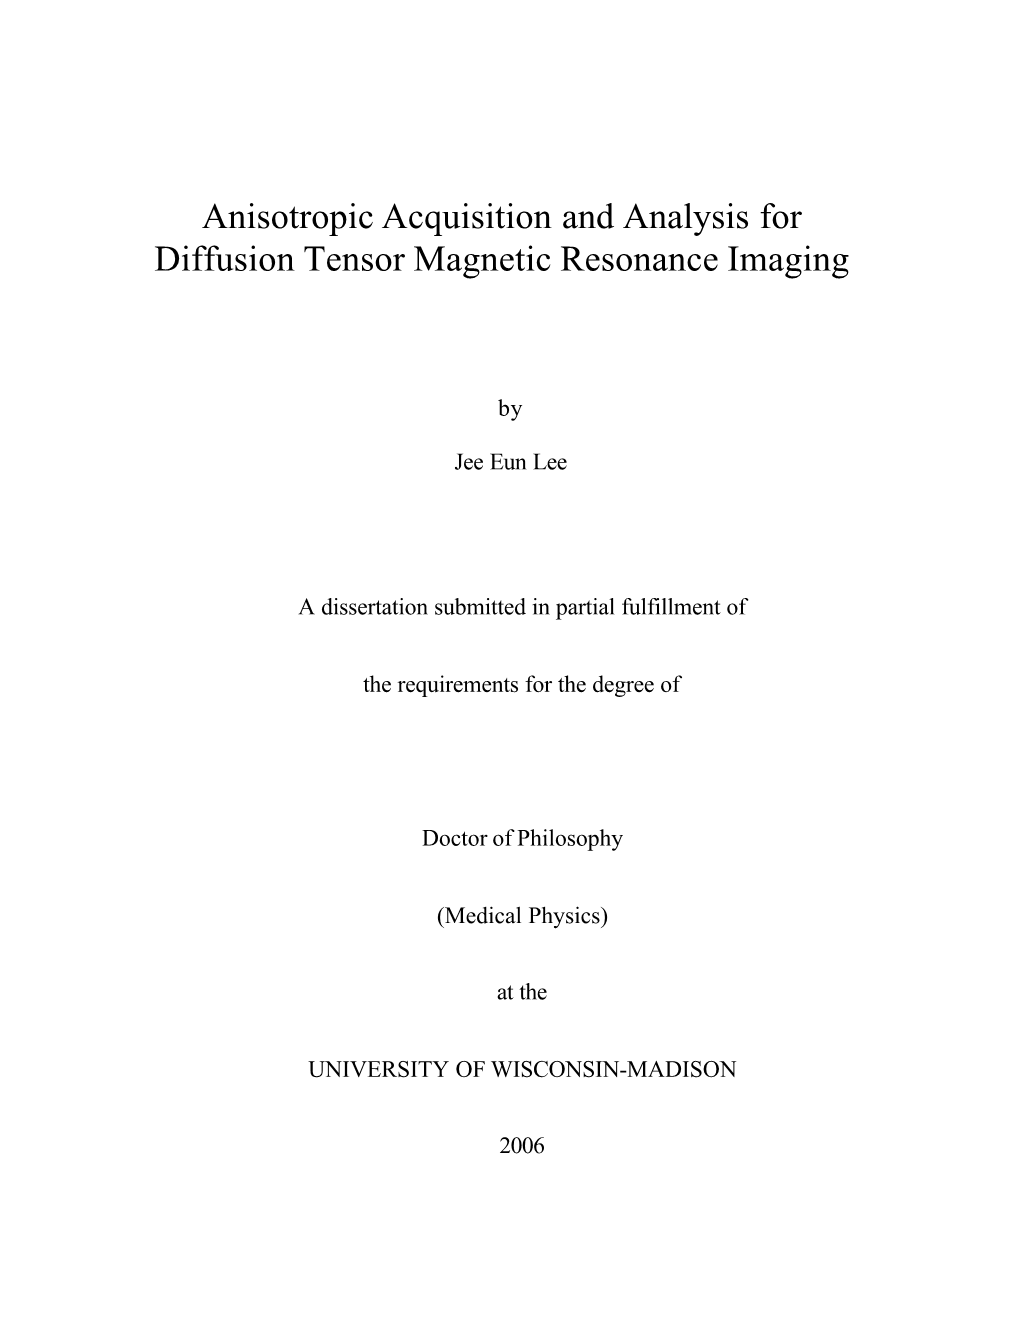 Anisotropic Acquisition and Analysis for Diffusion Tensor Magnetic Resonance Imaging